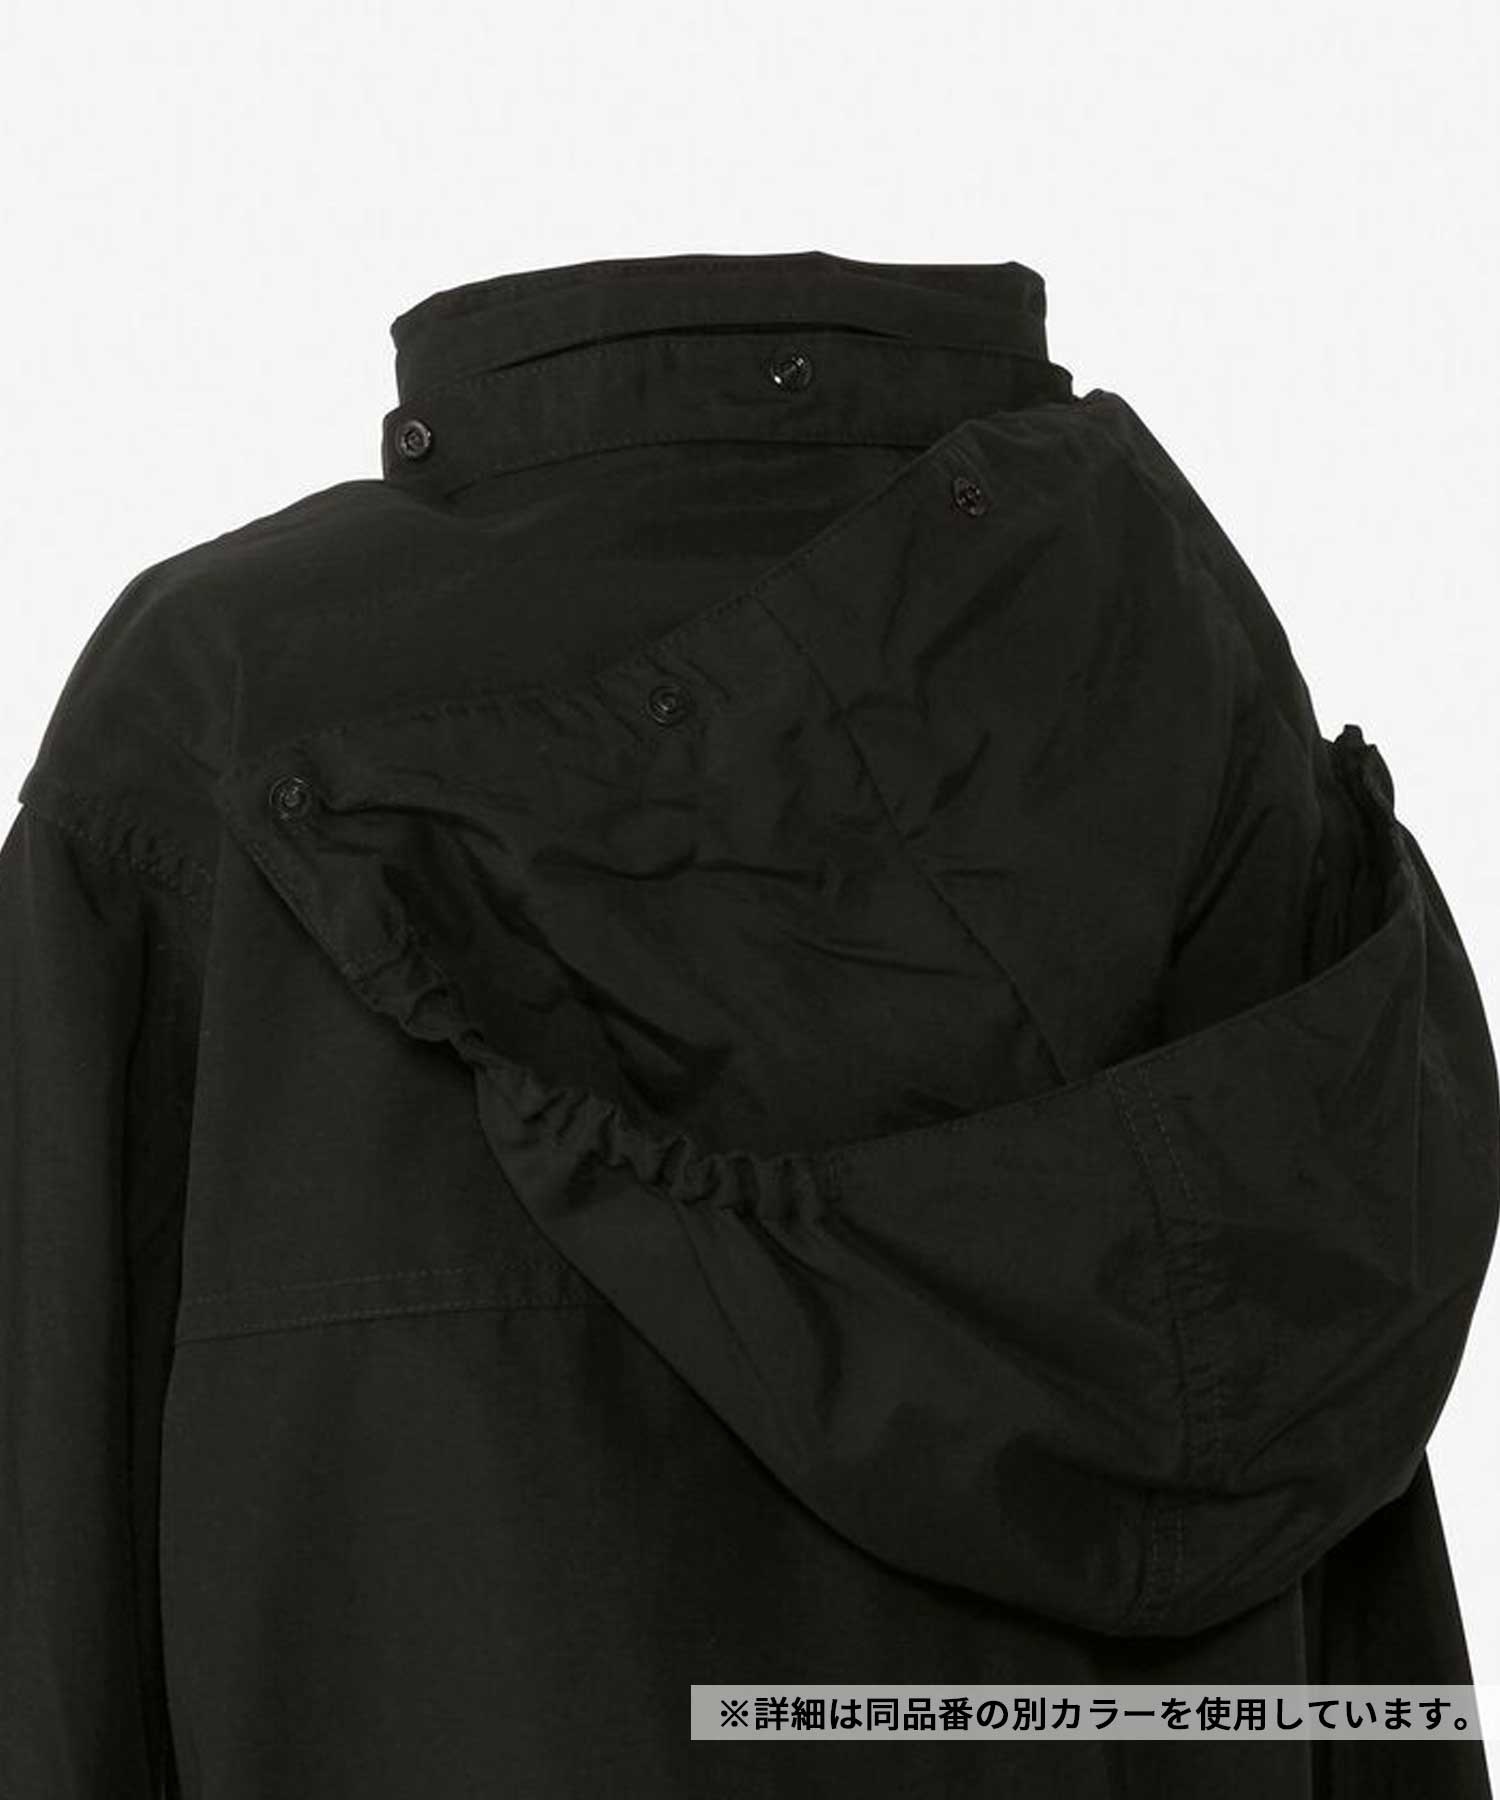 THE NORTH FACE ザ・ノース・フェイス COMPACT JACKET キッズ ジュニア 